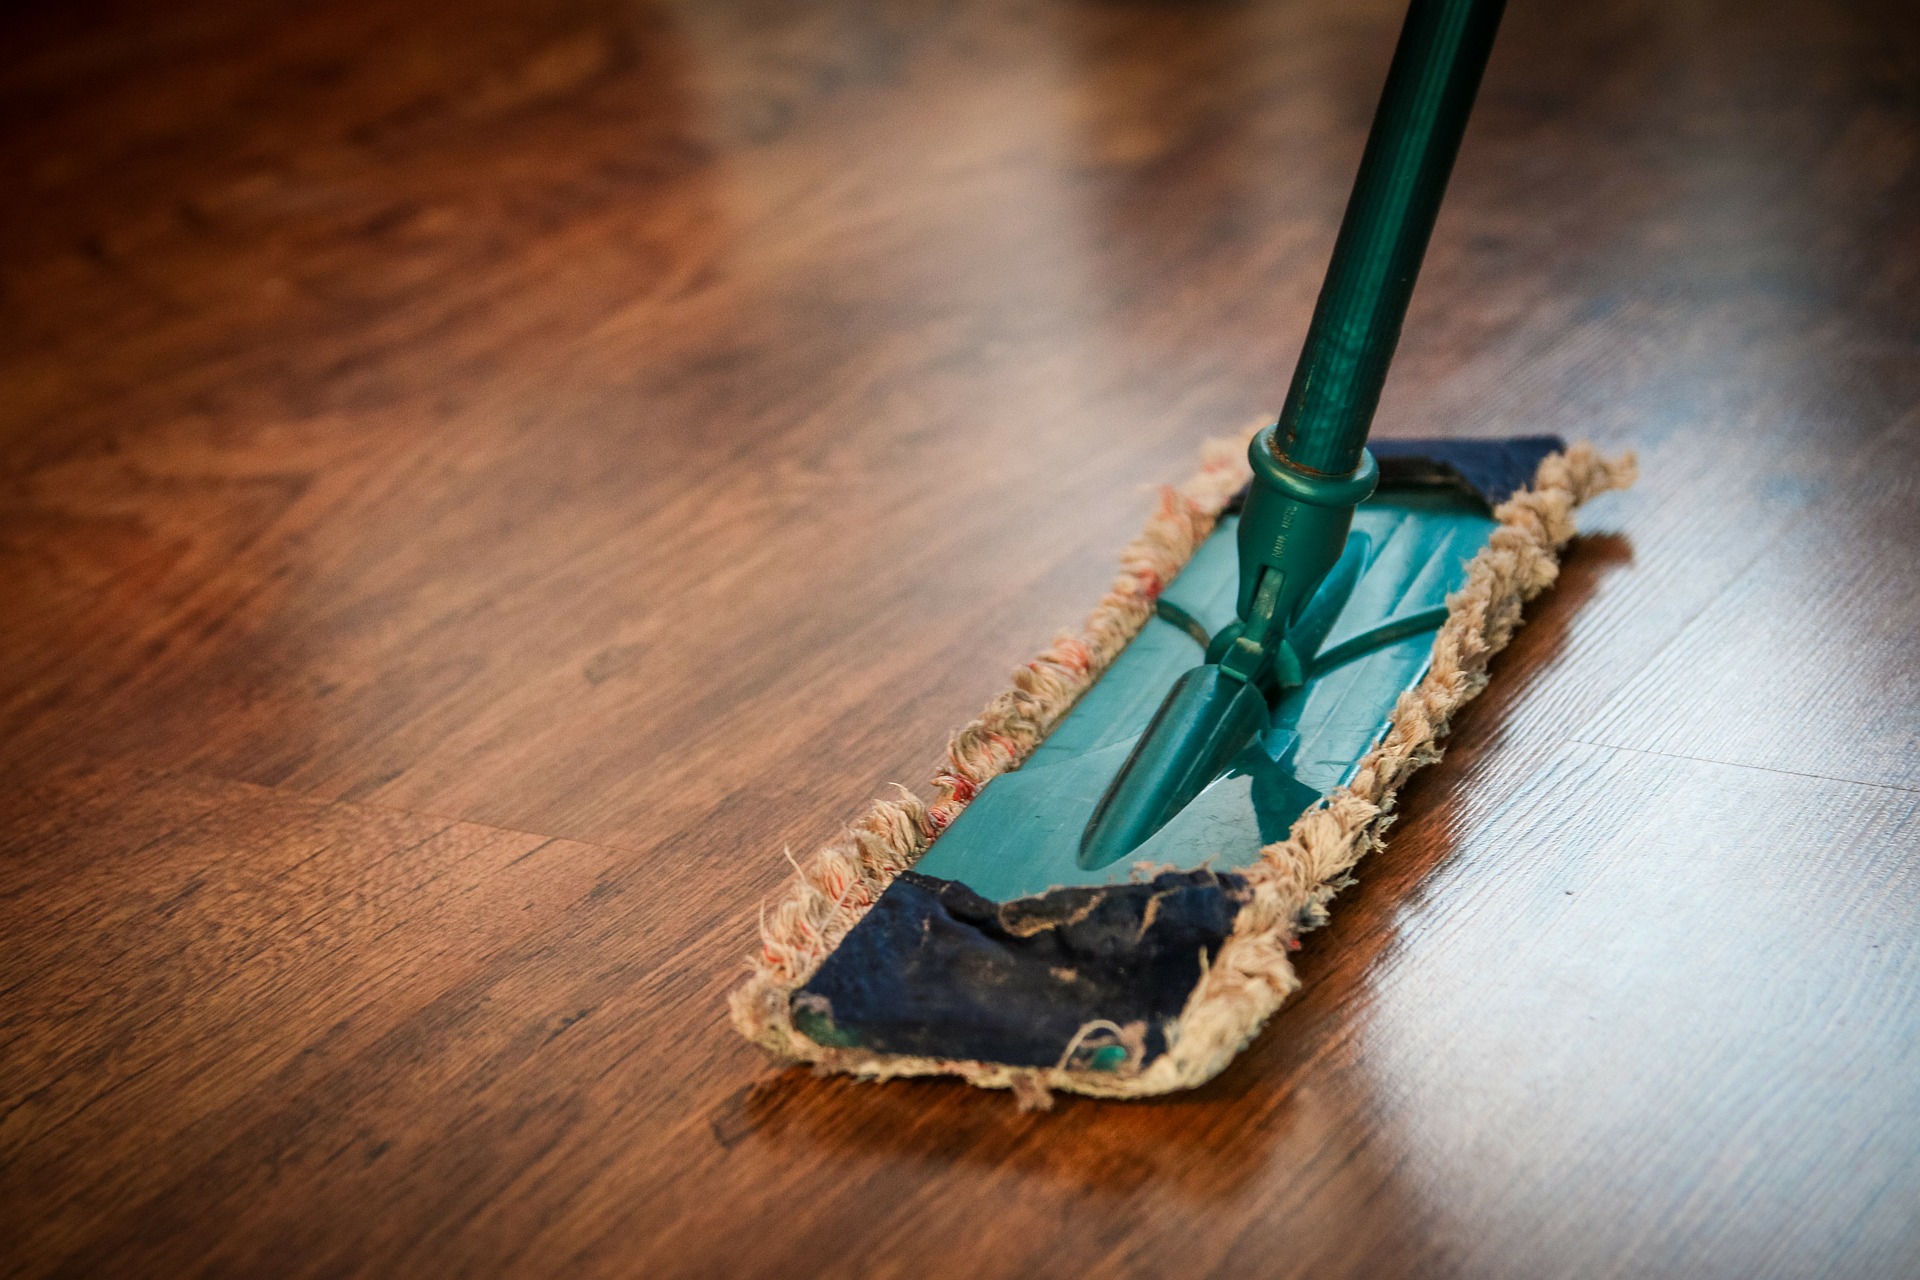 Taking the extra time to mop your floors and get stains out of carpet could make all the difference in getting your deposit back.